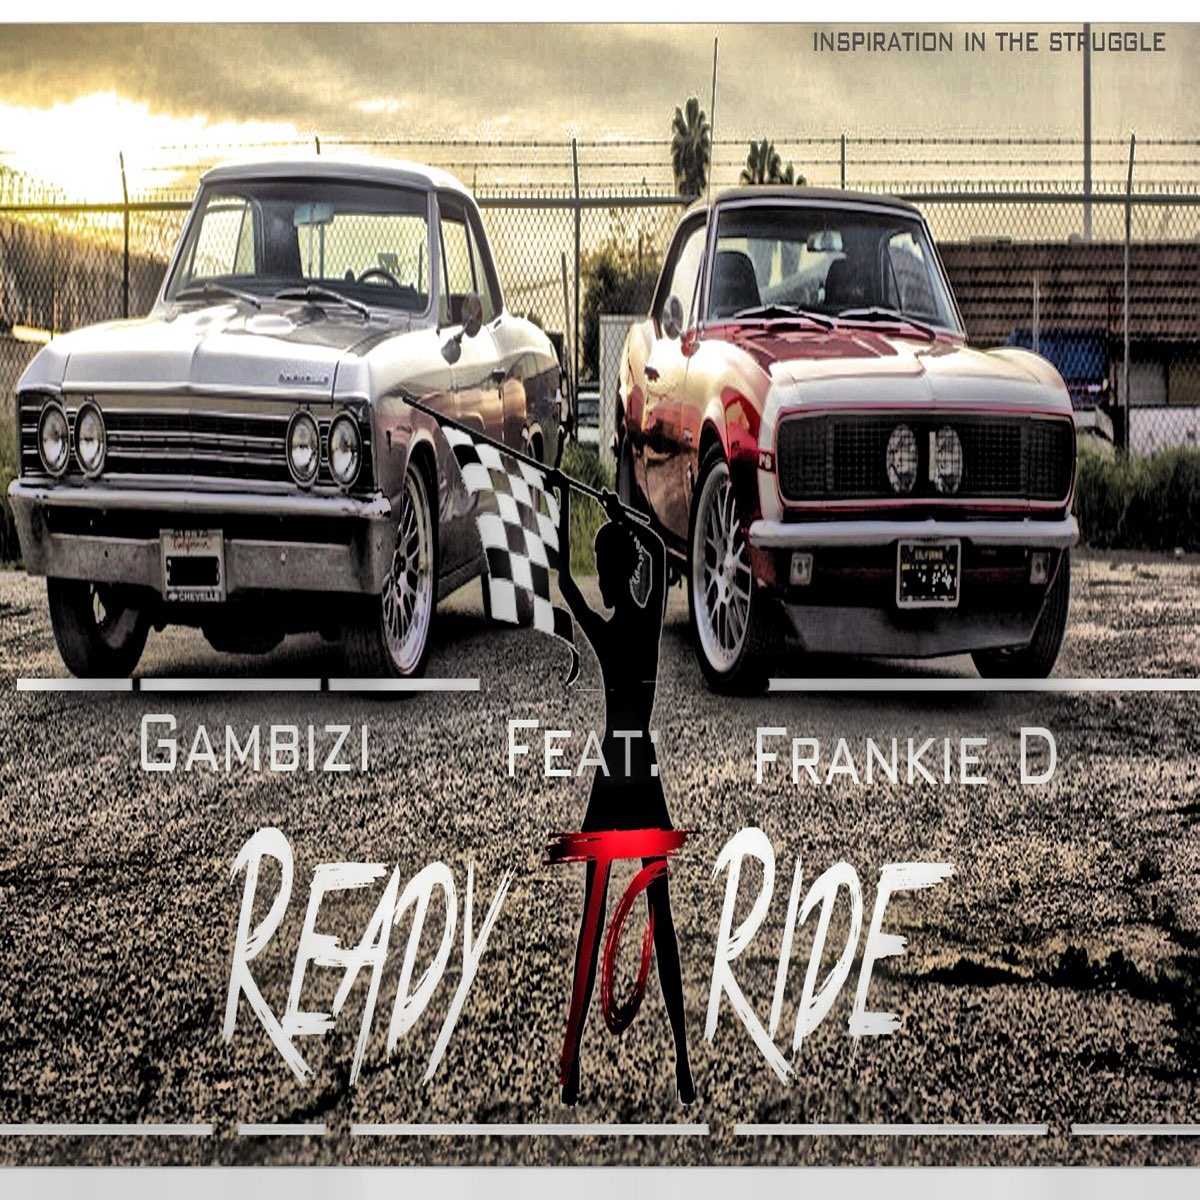 Feat riders. Frankie d. Ready to Ride. Look at the World (feat. Javad) - Single.